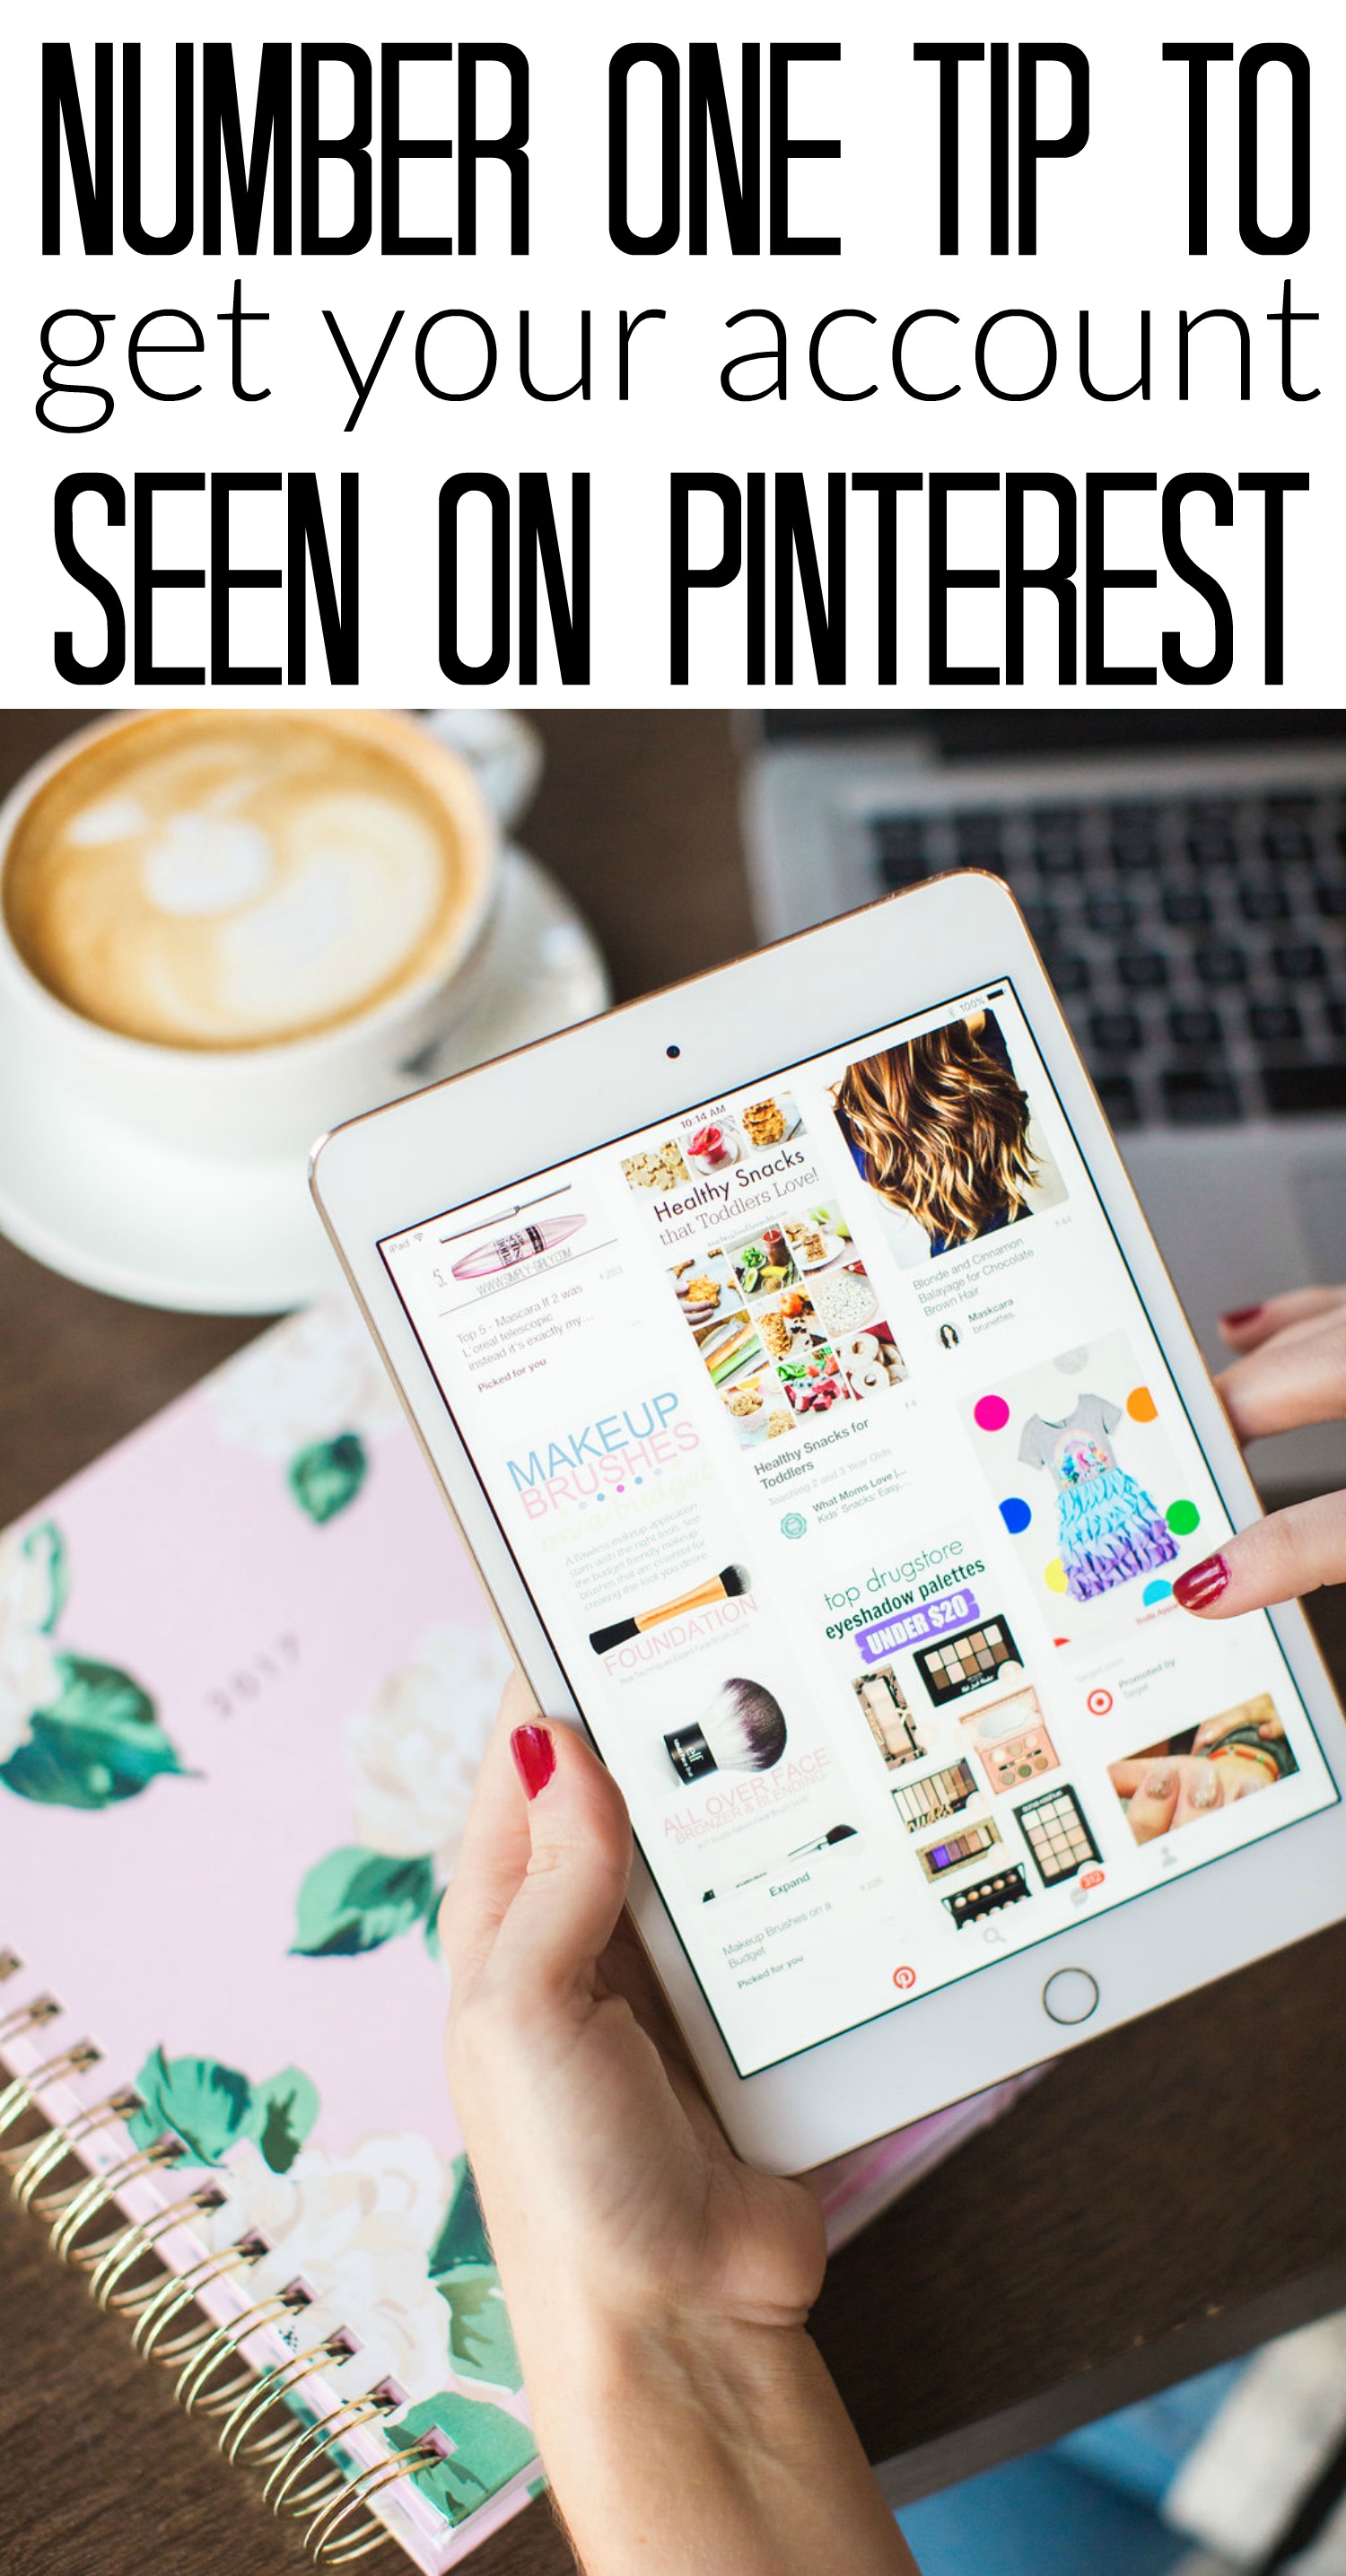 Number One Tip to Get YOUR Account Seen on Pinterest